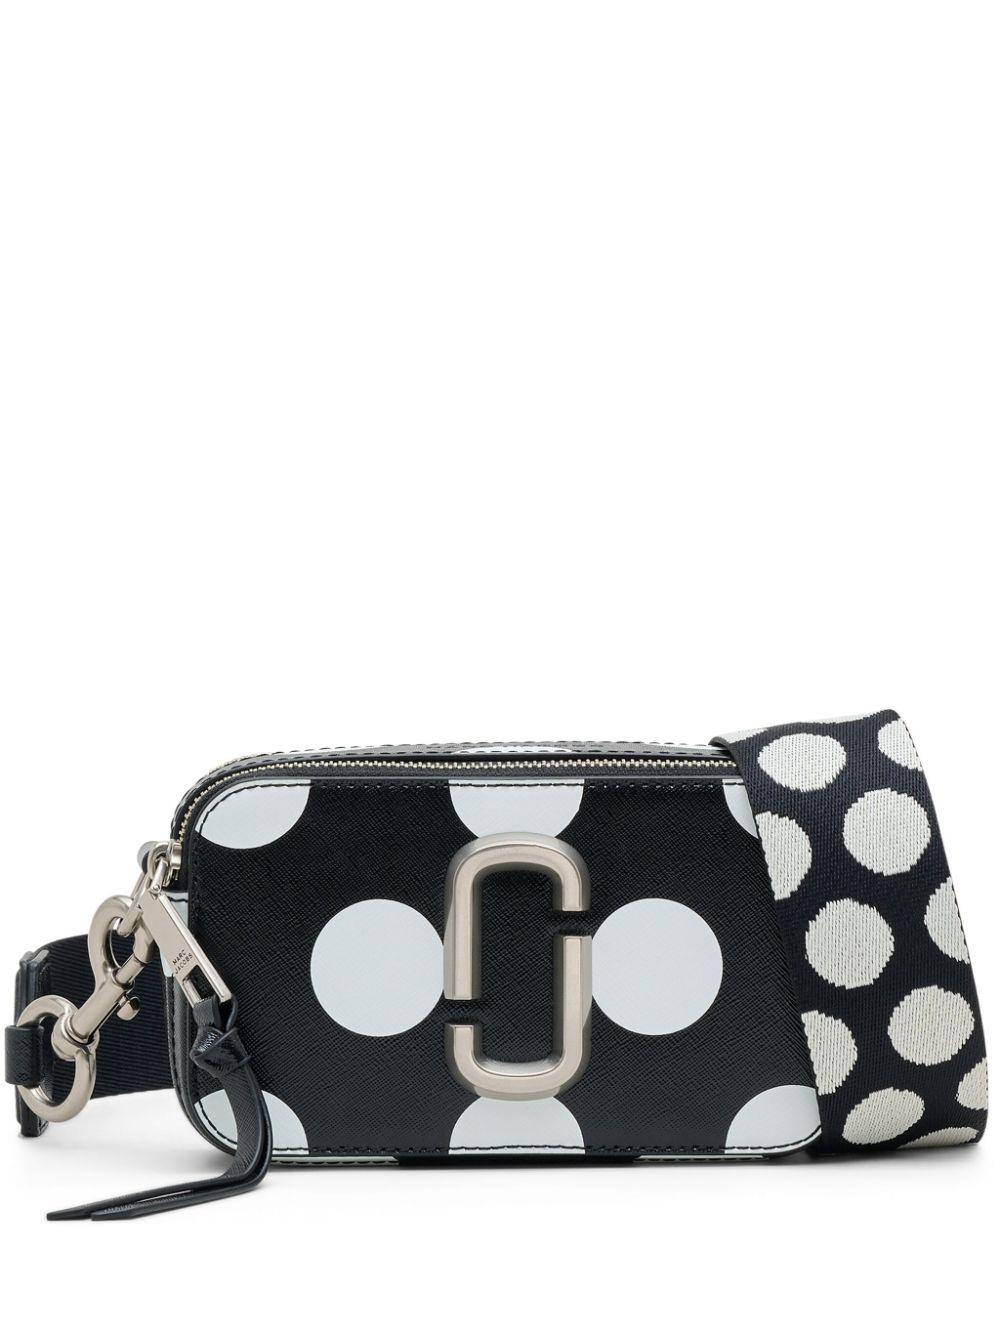 Marc Jacobs The Snapshot Camera Bag in Black